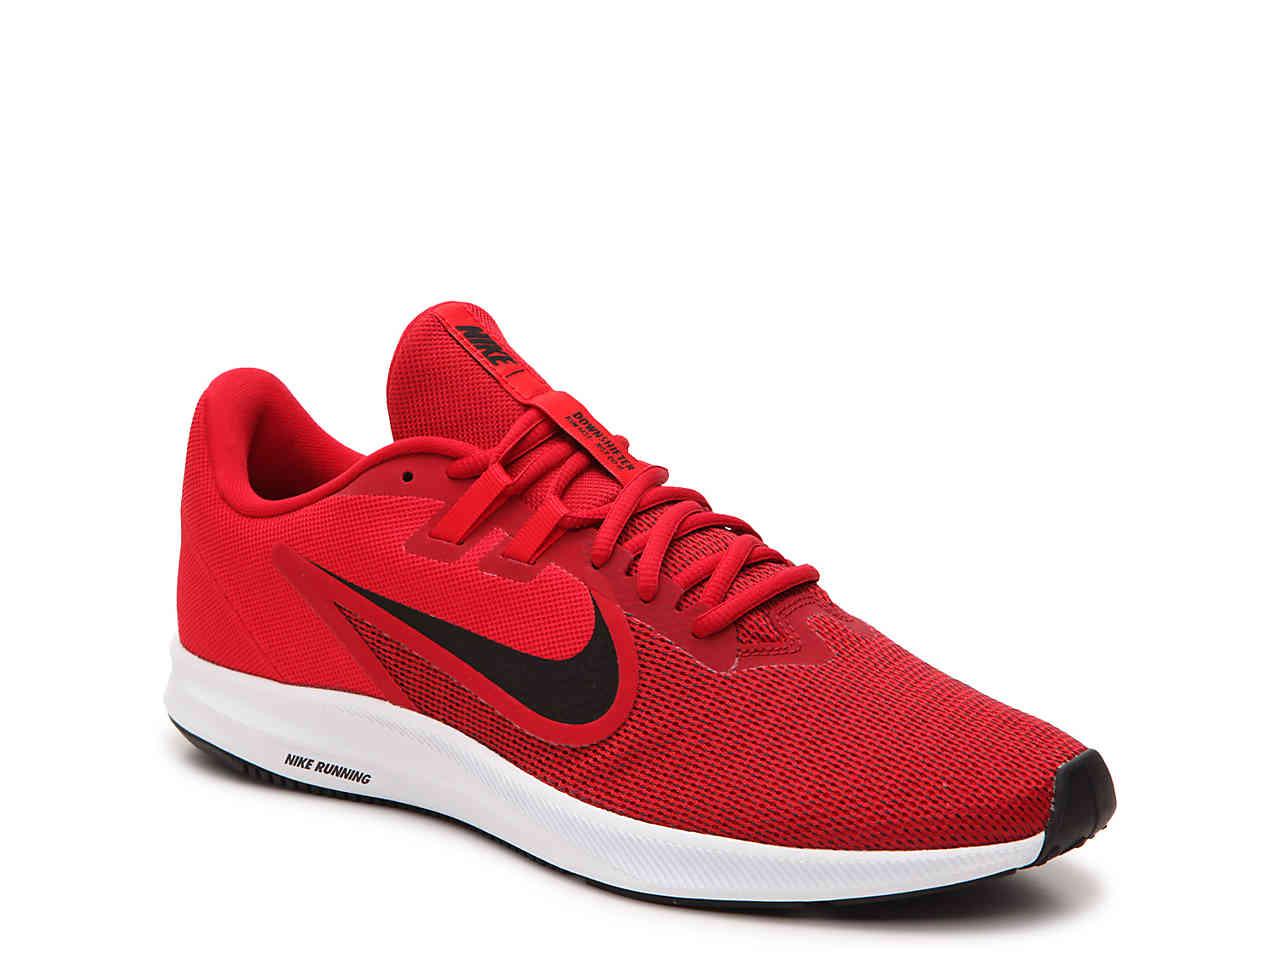 Nike Downshifter 9 Lightweight Running Shoe in Red for Men - Lyst